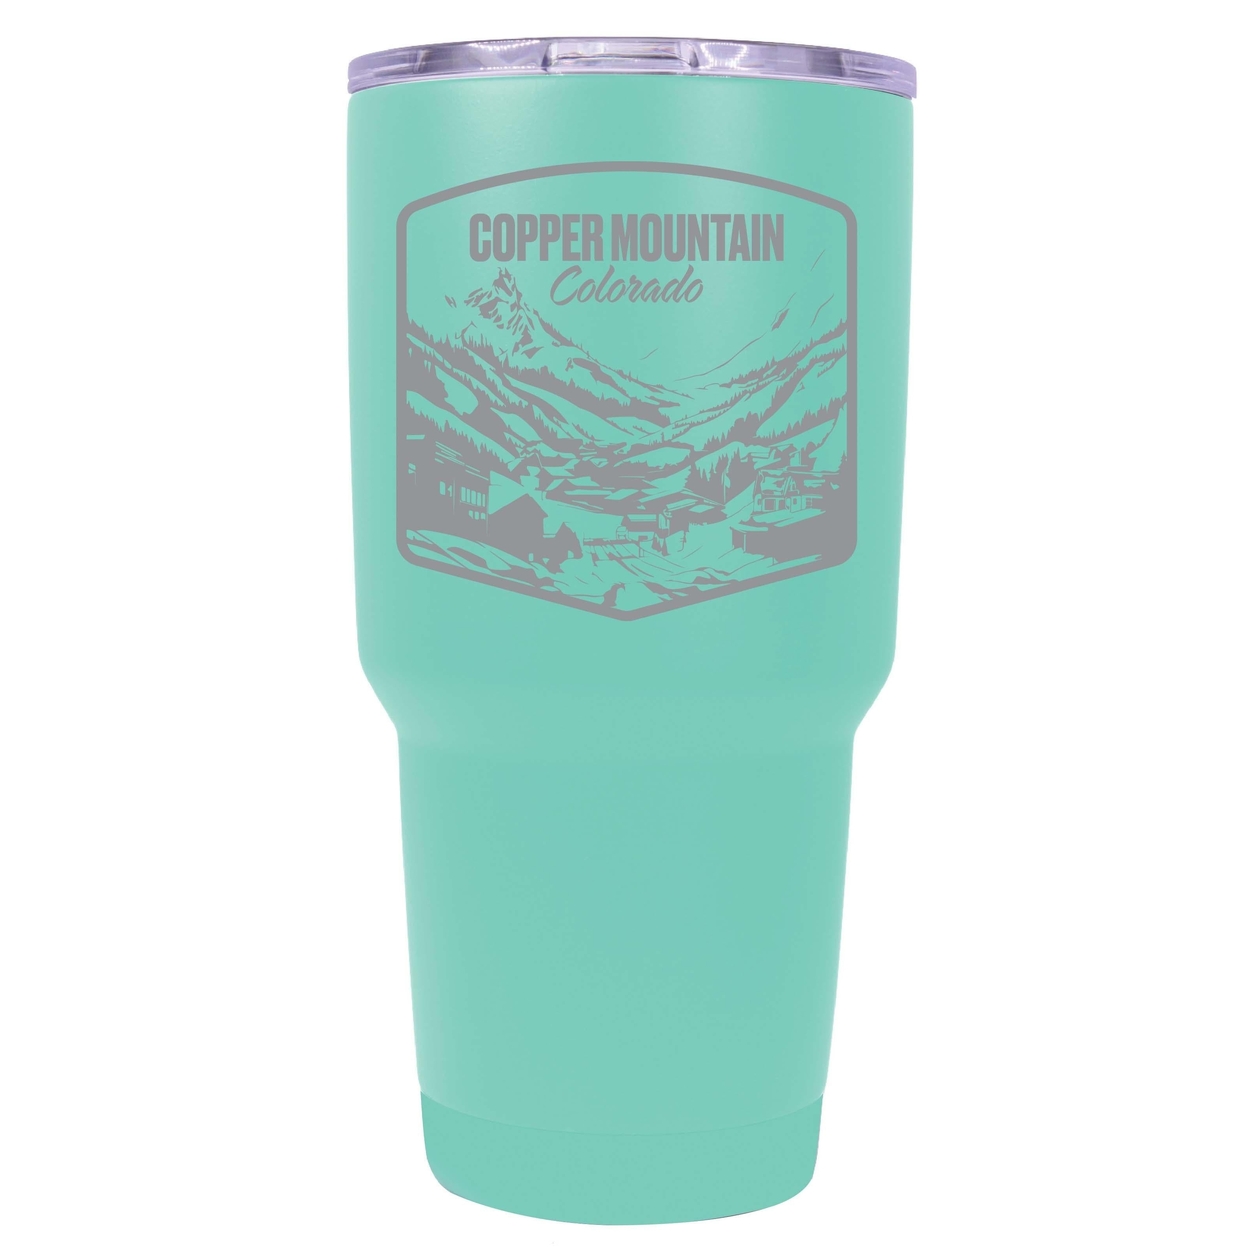 Copper Mountain Souvenir 24 Oz Engraved Insulated Tumbler - Red,,4-Pack